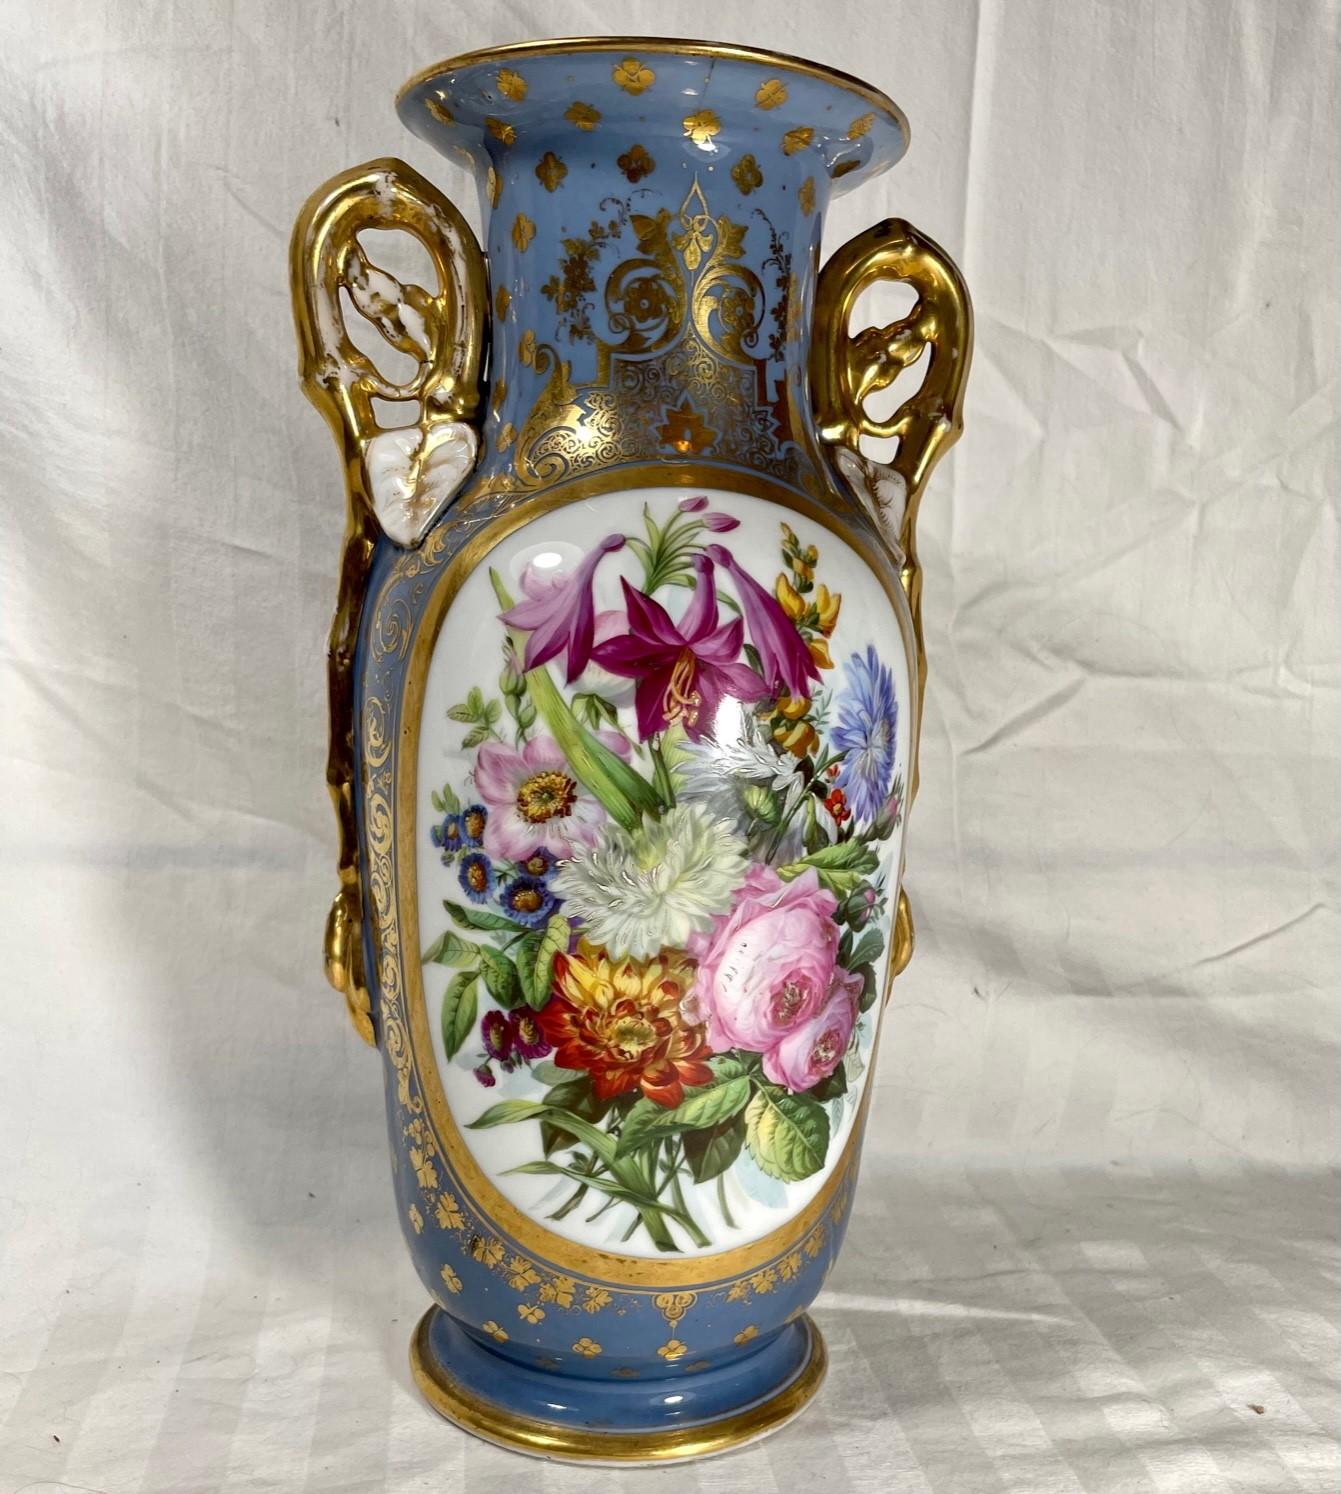 19th century French Old Paris double handled porcelain vase.

Mid 19th century exceptional decorative porcelain vase featuring two gilt handles. The exterior is finely painted with a large floral bouquet in reserve. Gilt decoration on a blue